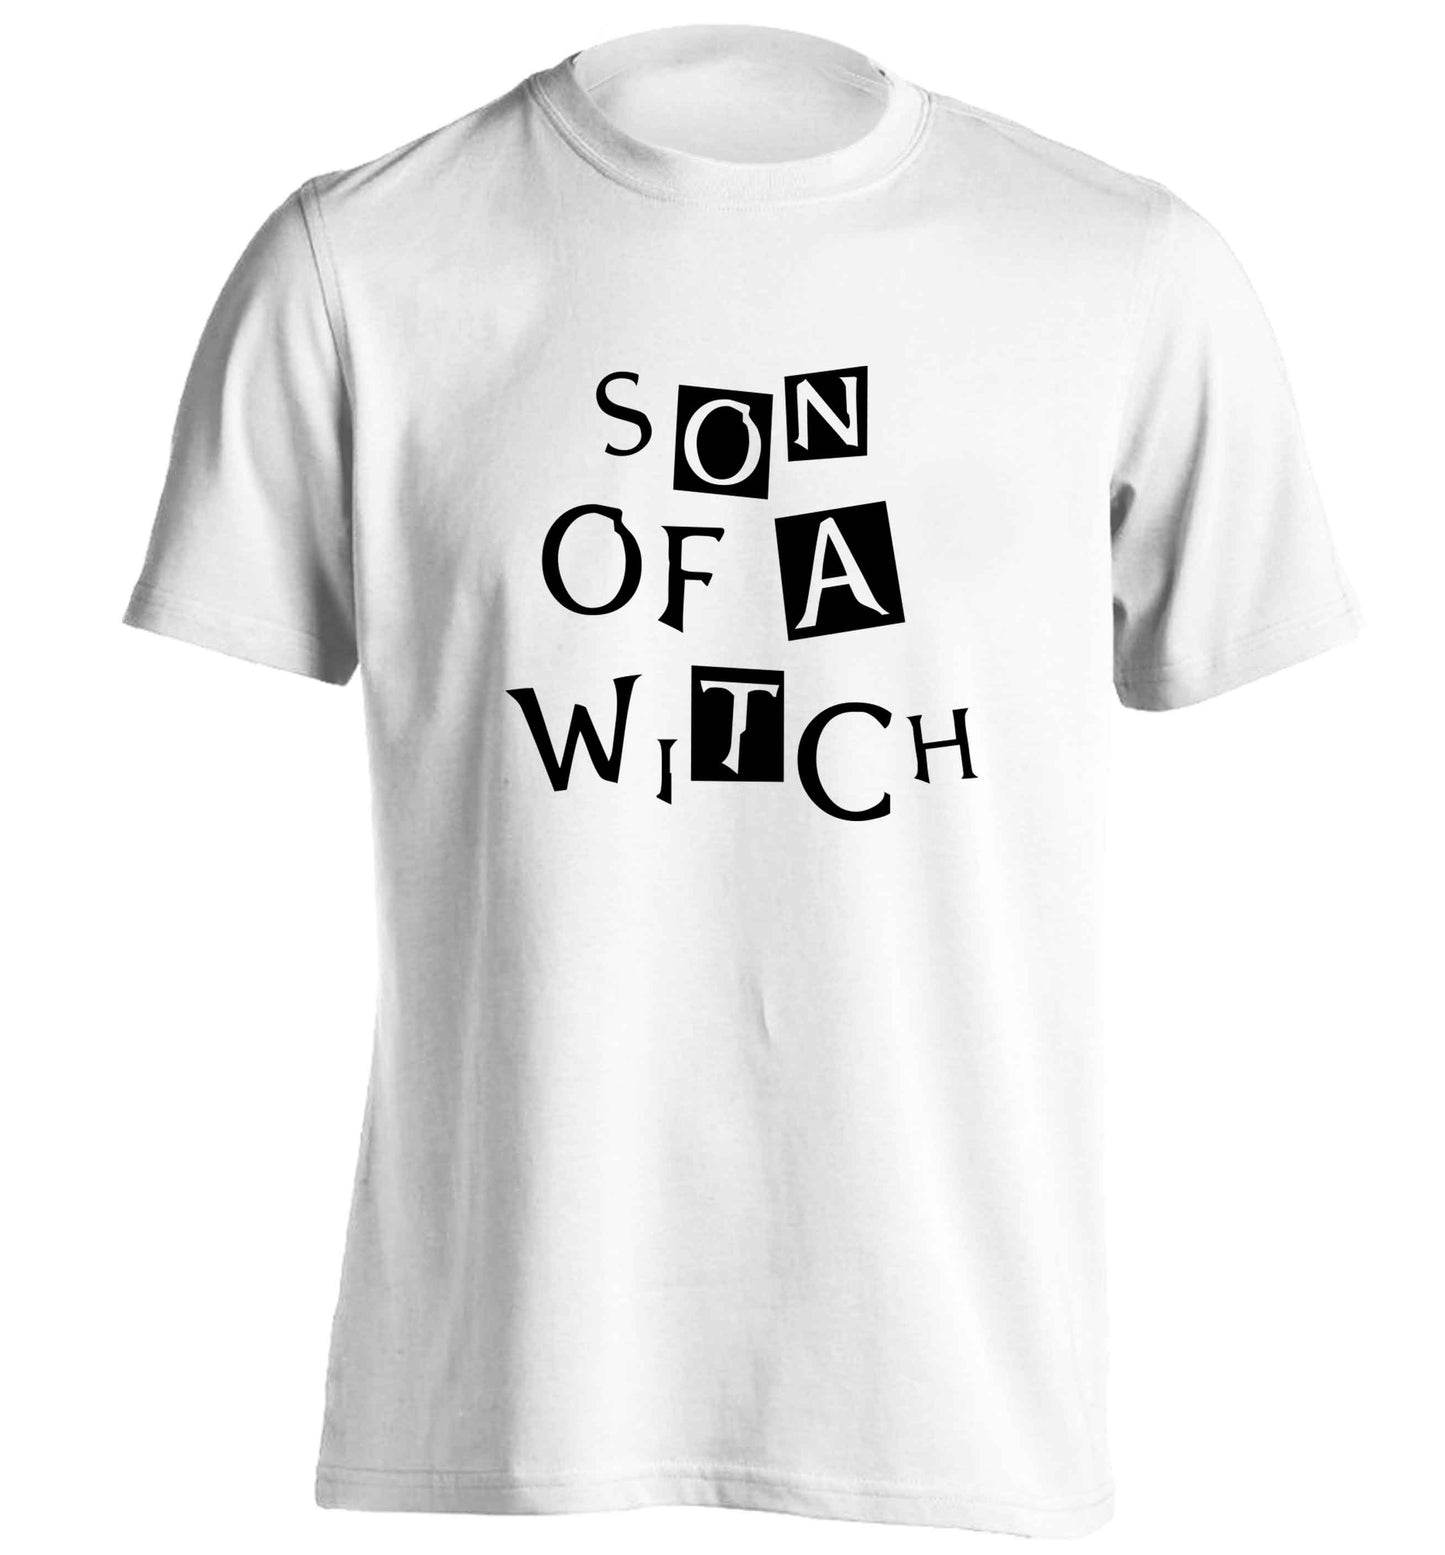 Son of a witch adults unisex white Tshirt 2XL